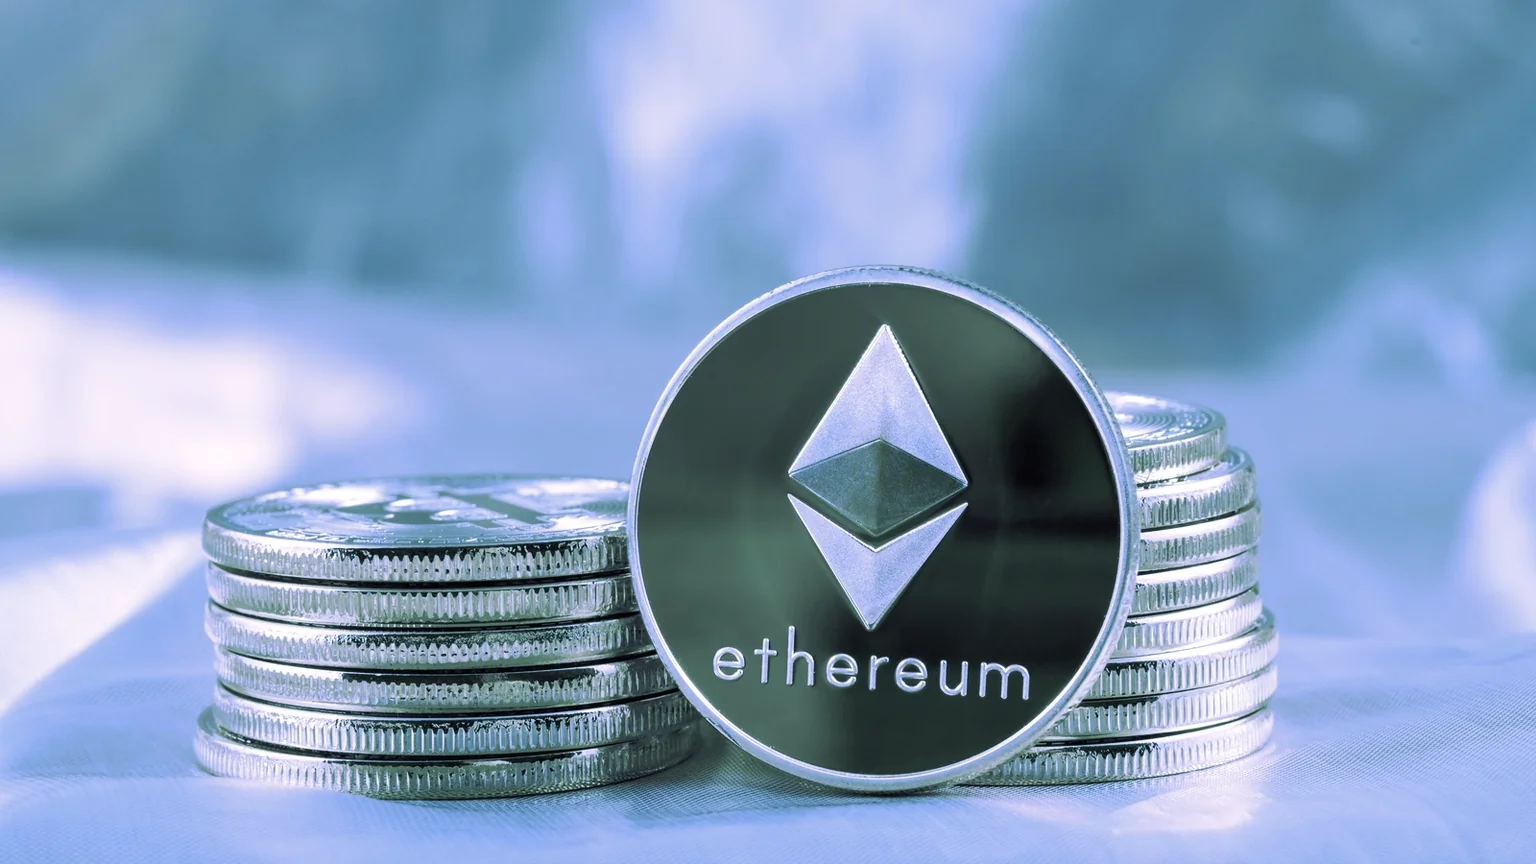 Ethereum is a smart contracts platform. Image: Shutterstock